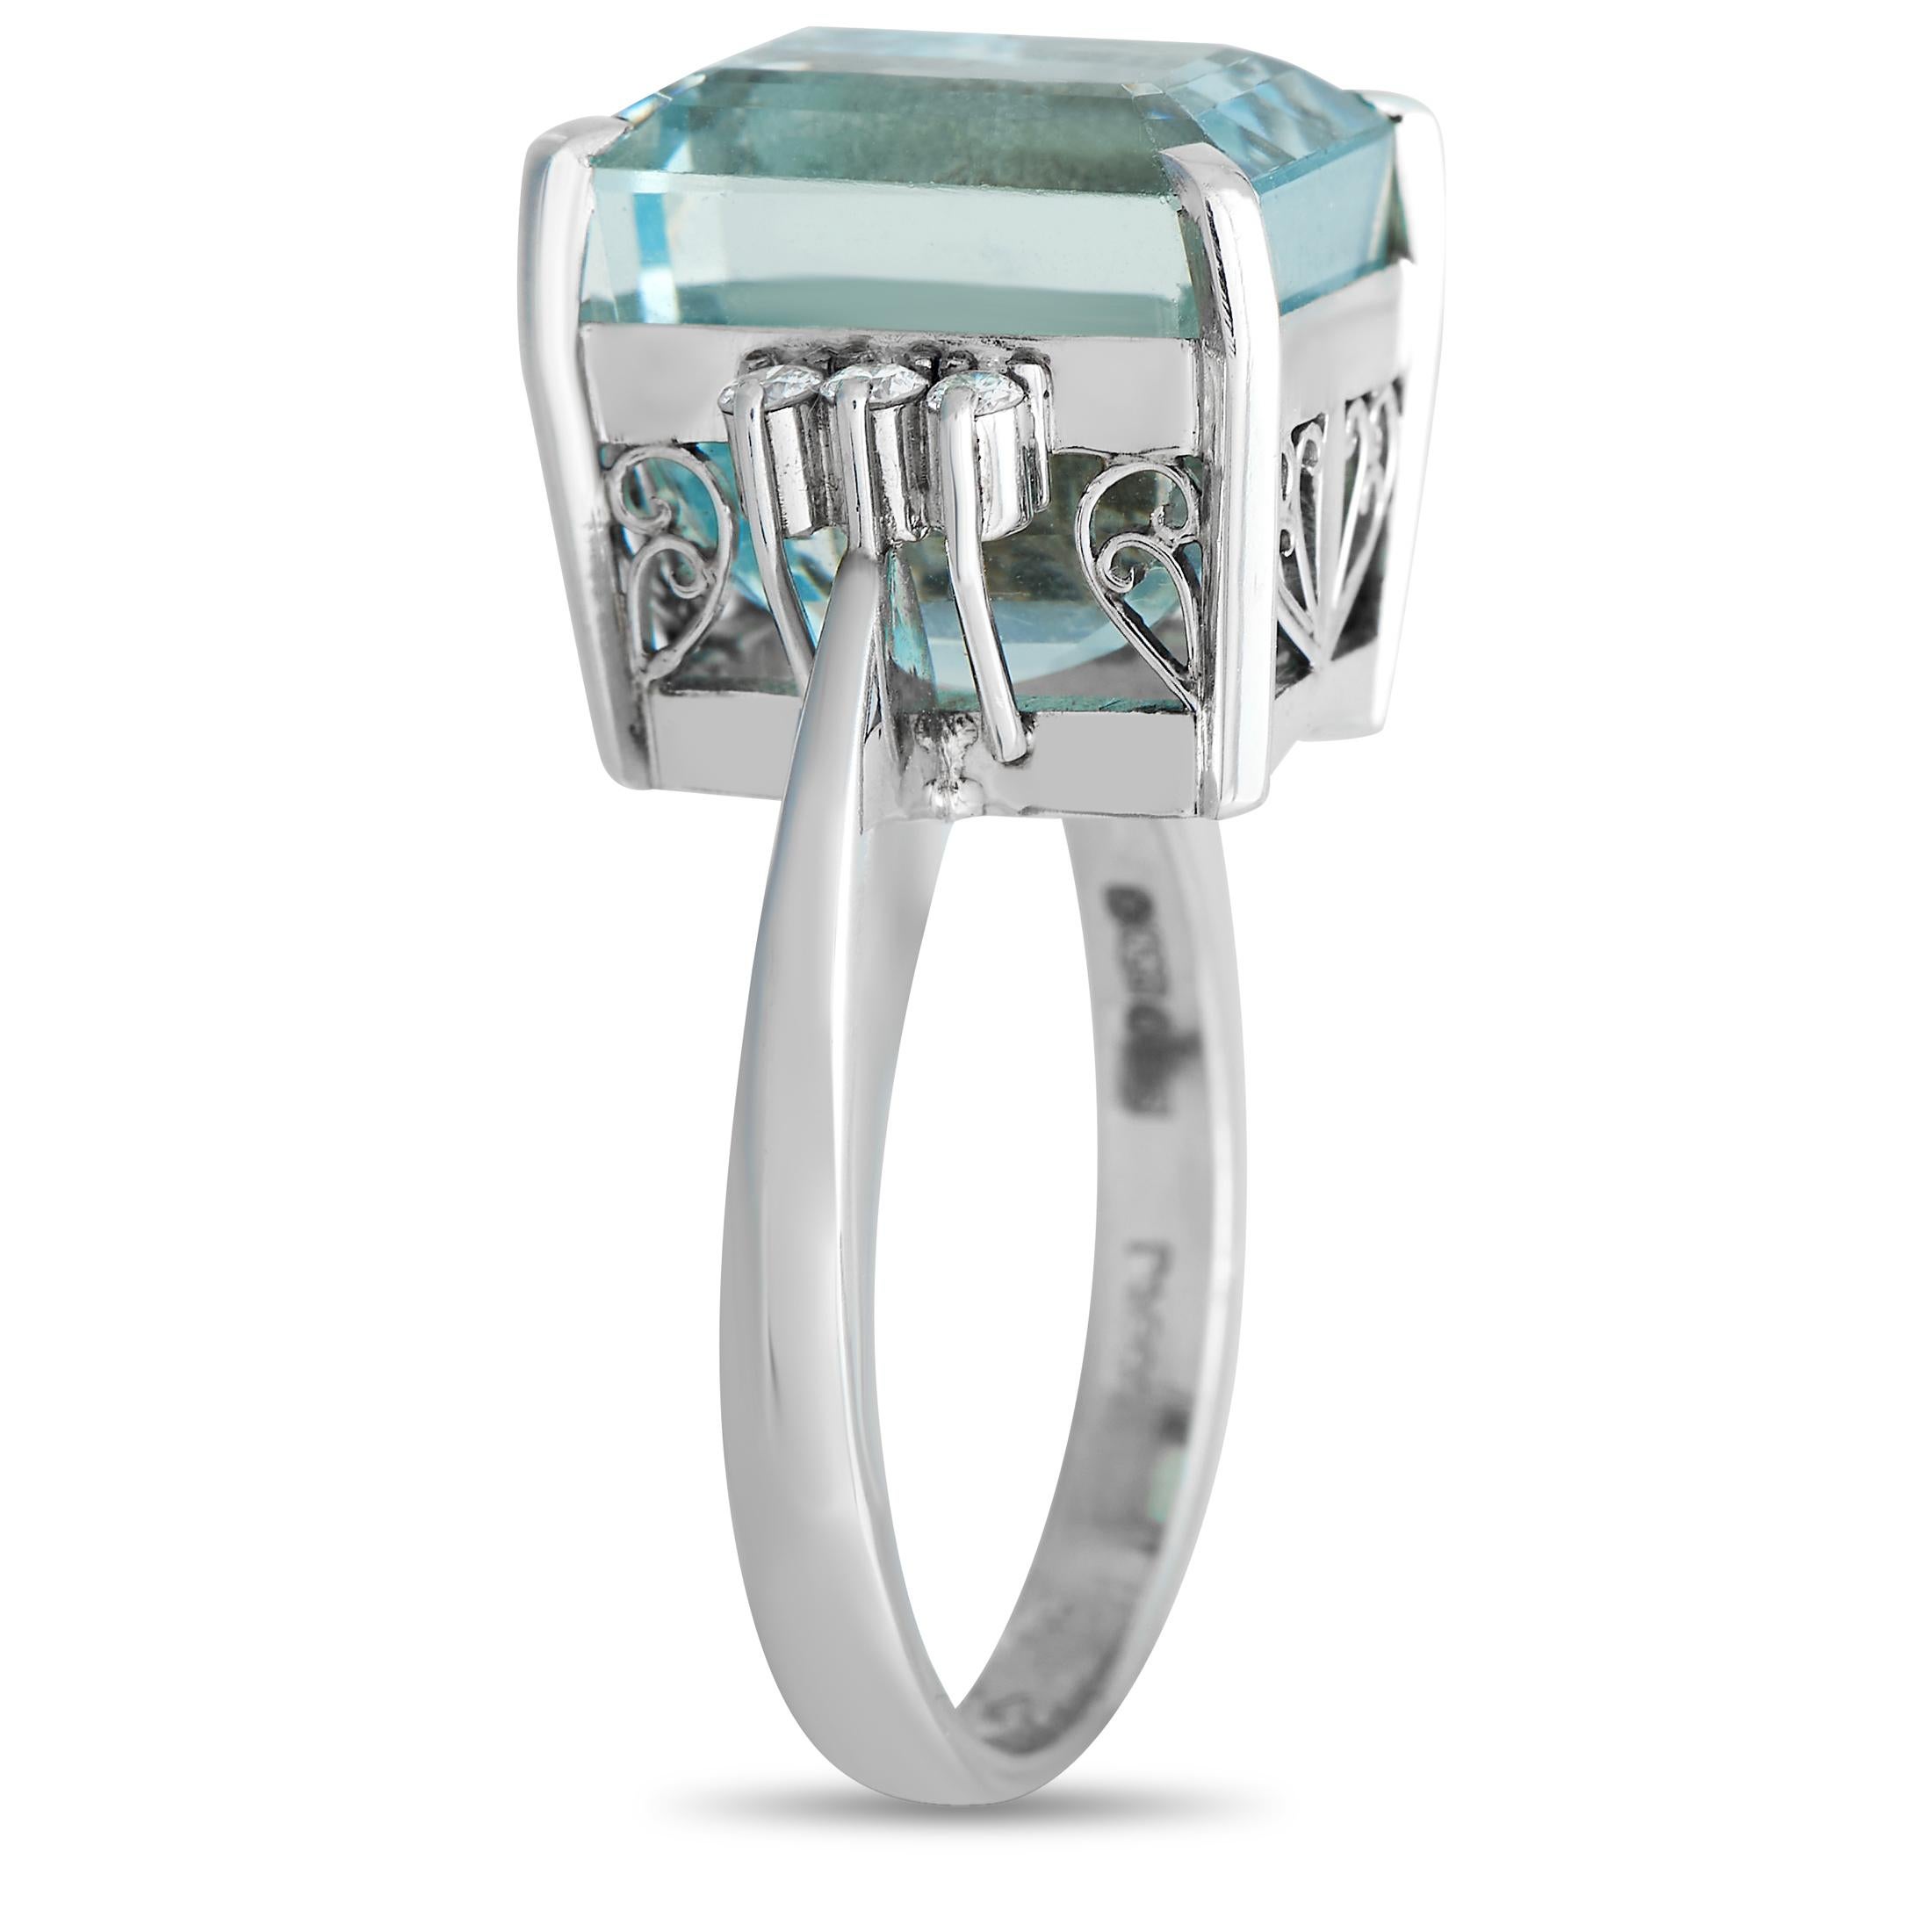 Sure to mesmerize is this aquamarine and diamond ring in everlasting platinum The pinched shank measures 2mm thick and has a graceful profile. It is topped with a sizeable 11.49 carat aquamarine in a step-cut, secured by a four-prong basket setting.